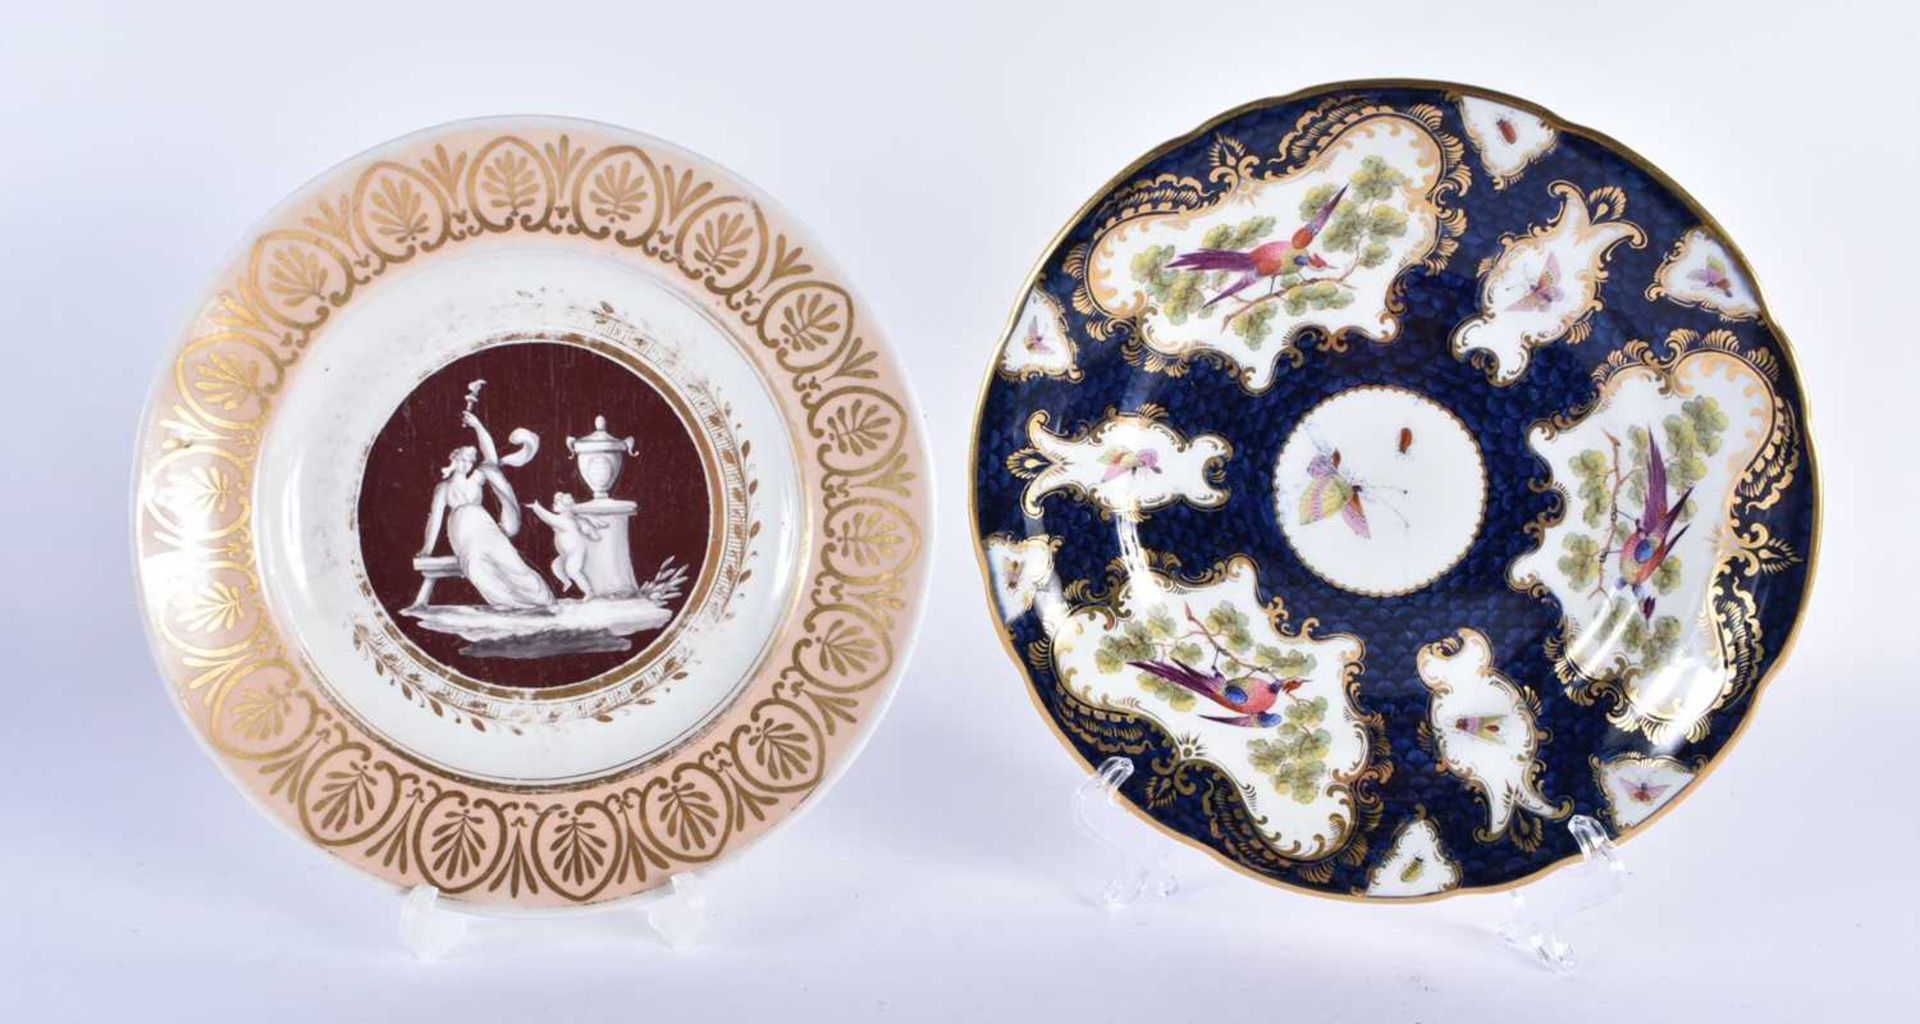 A COLLECTION OF 19TH CENTURY ENGLISH PORCELAIN PLATES in various forms and sizes. Largest 26.5 cm - Image 8 of 11